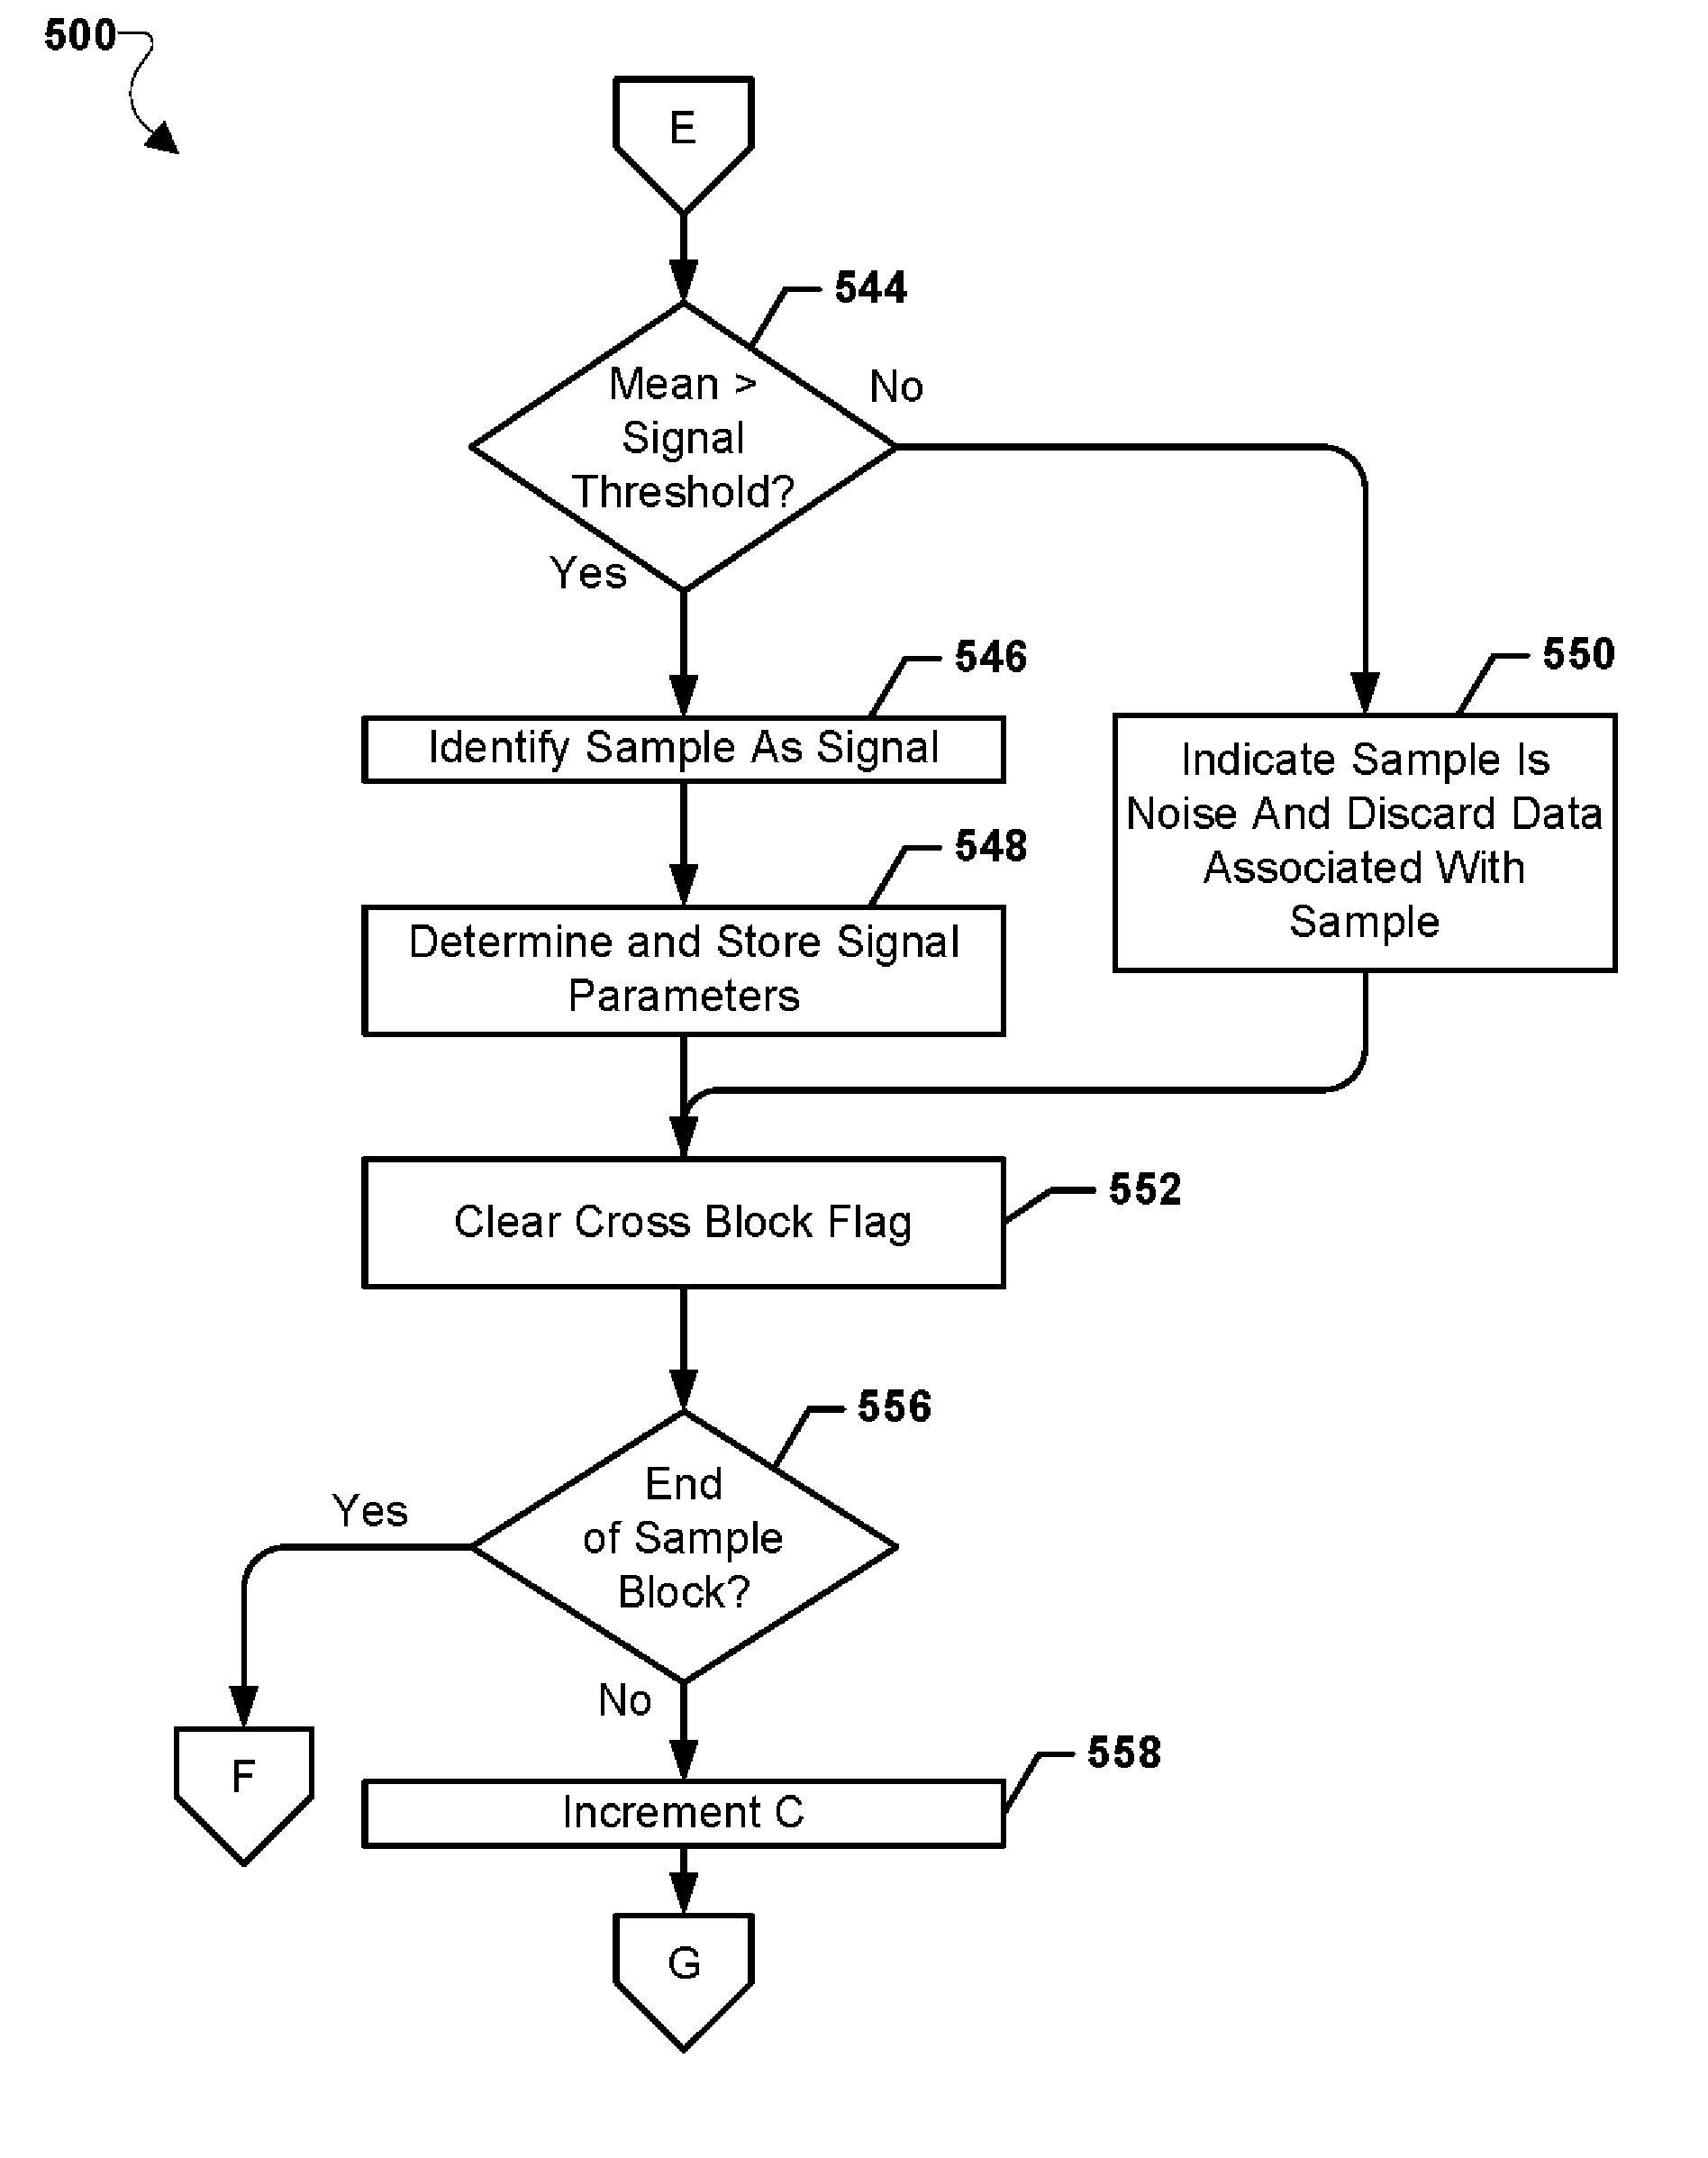 Systems, methods, and devices for electronic spectrum management for identifying open space